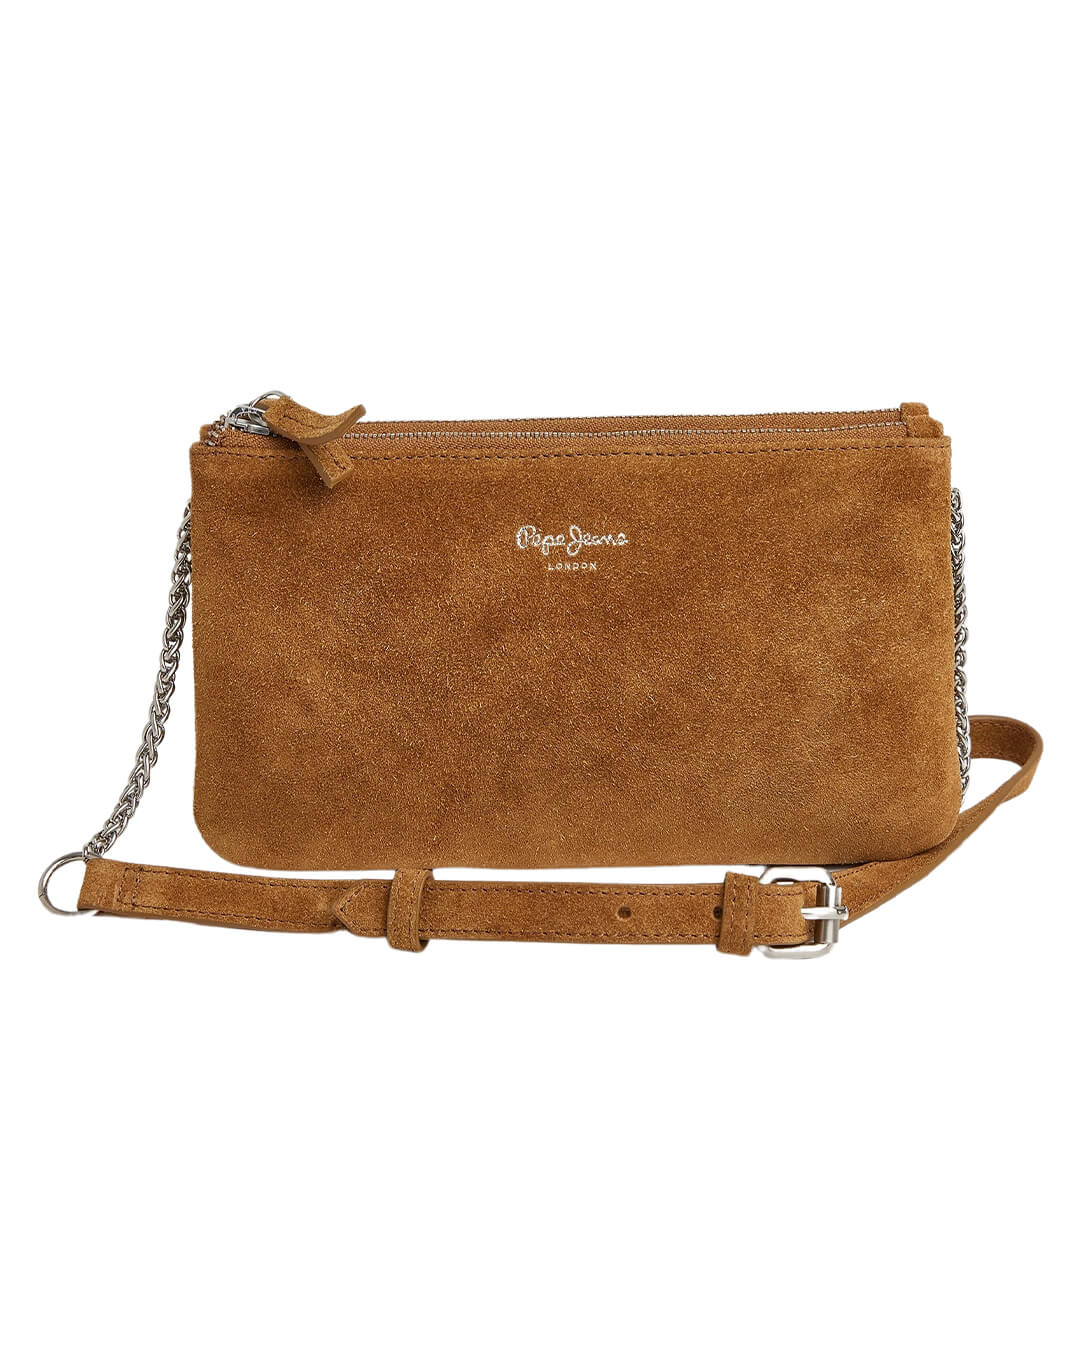 Pepe Jeans Bags ONE Pepe Jeans Astrid Angie Beige Bag